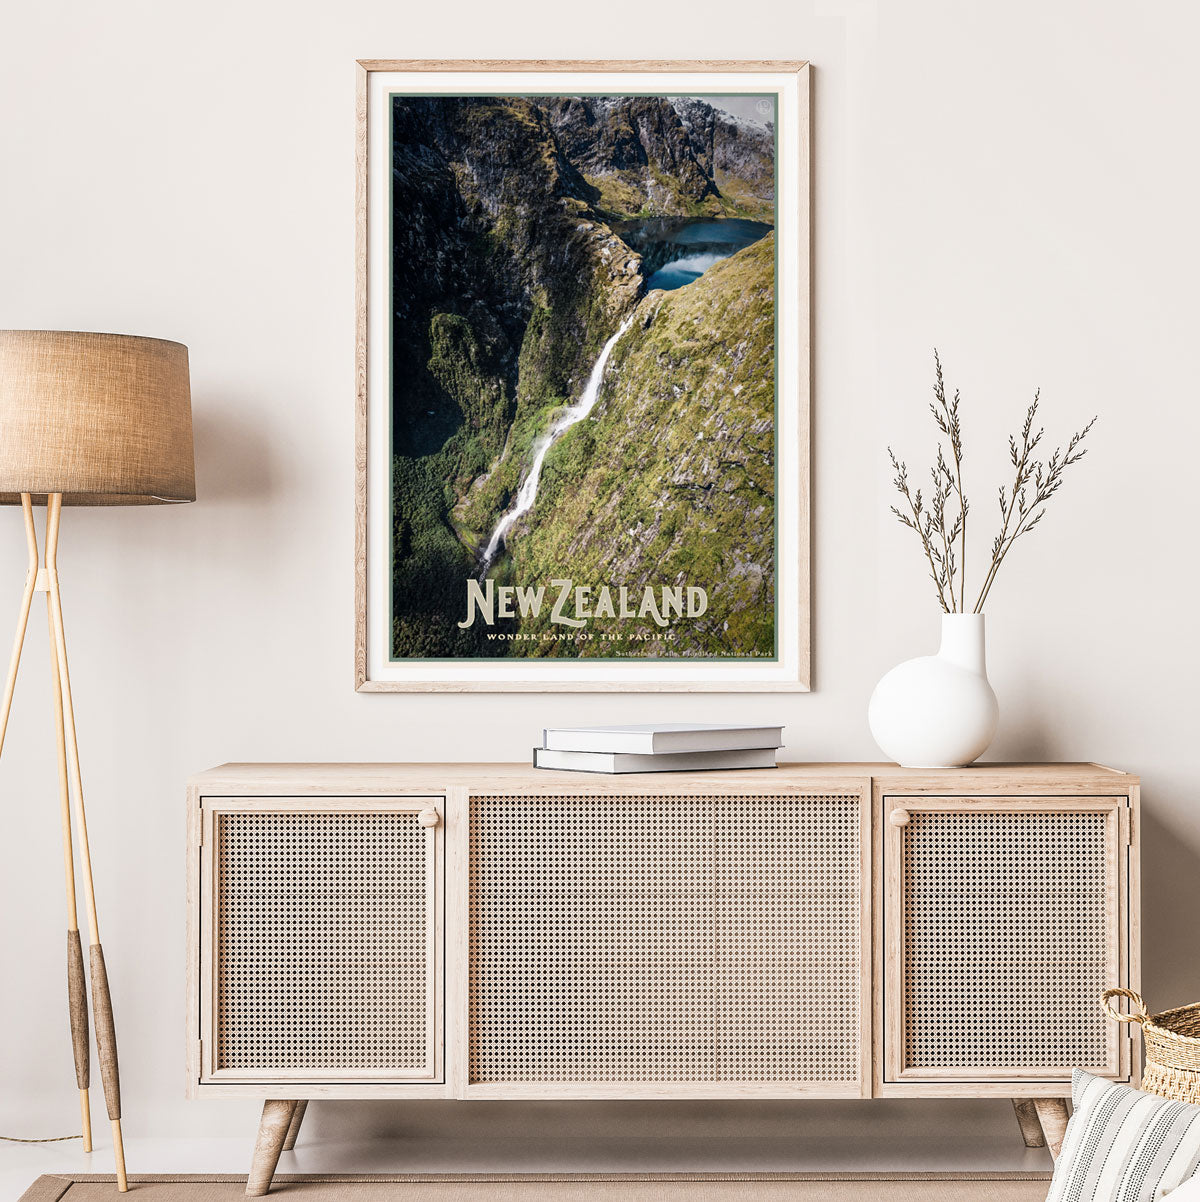 New Zealand vintage travel style print by places we luv